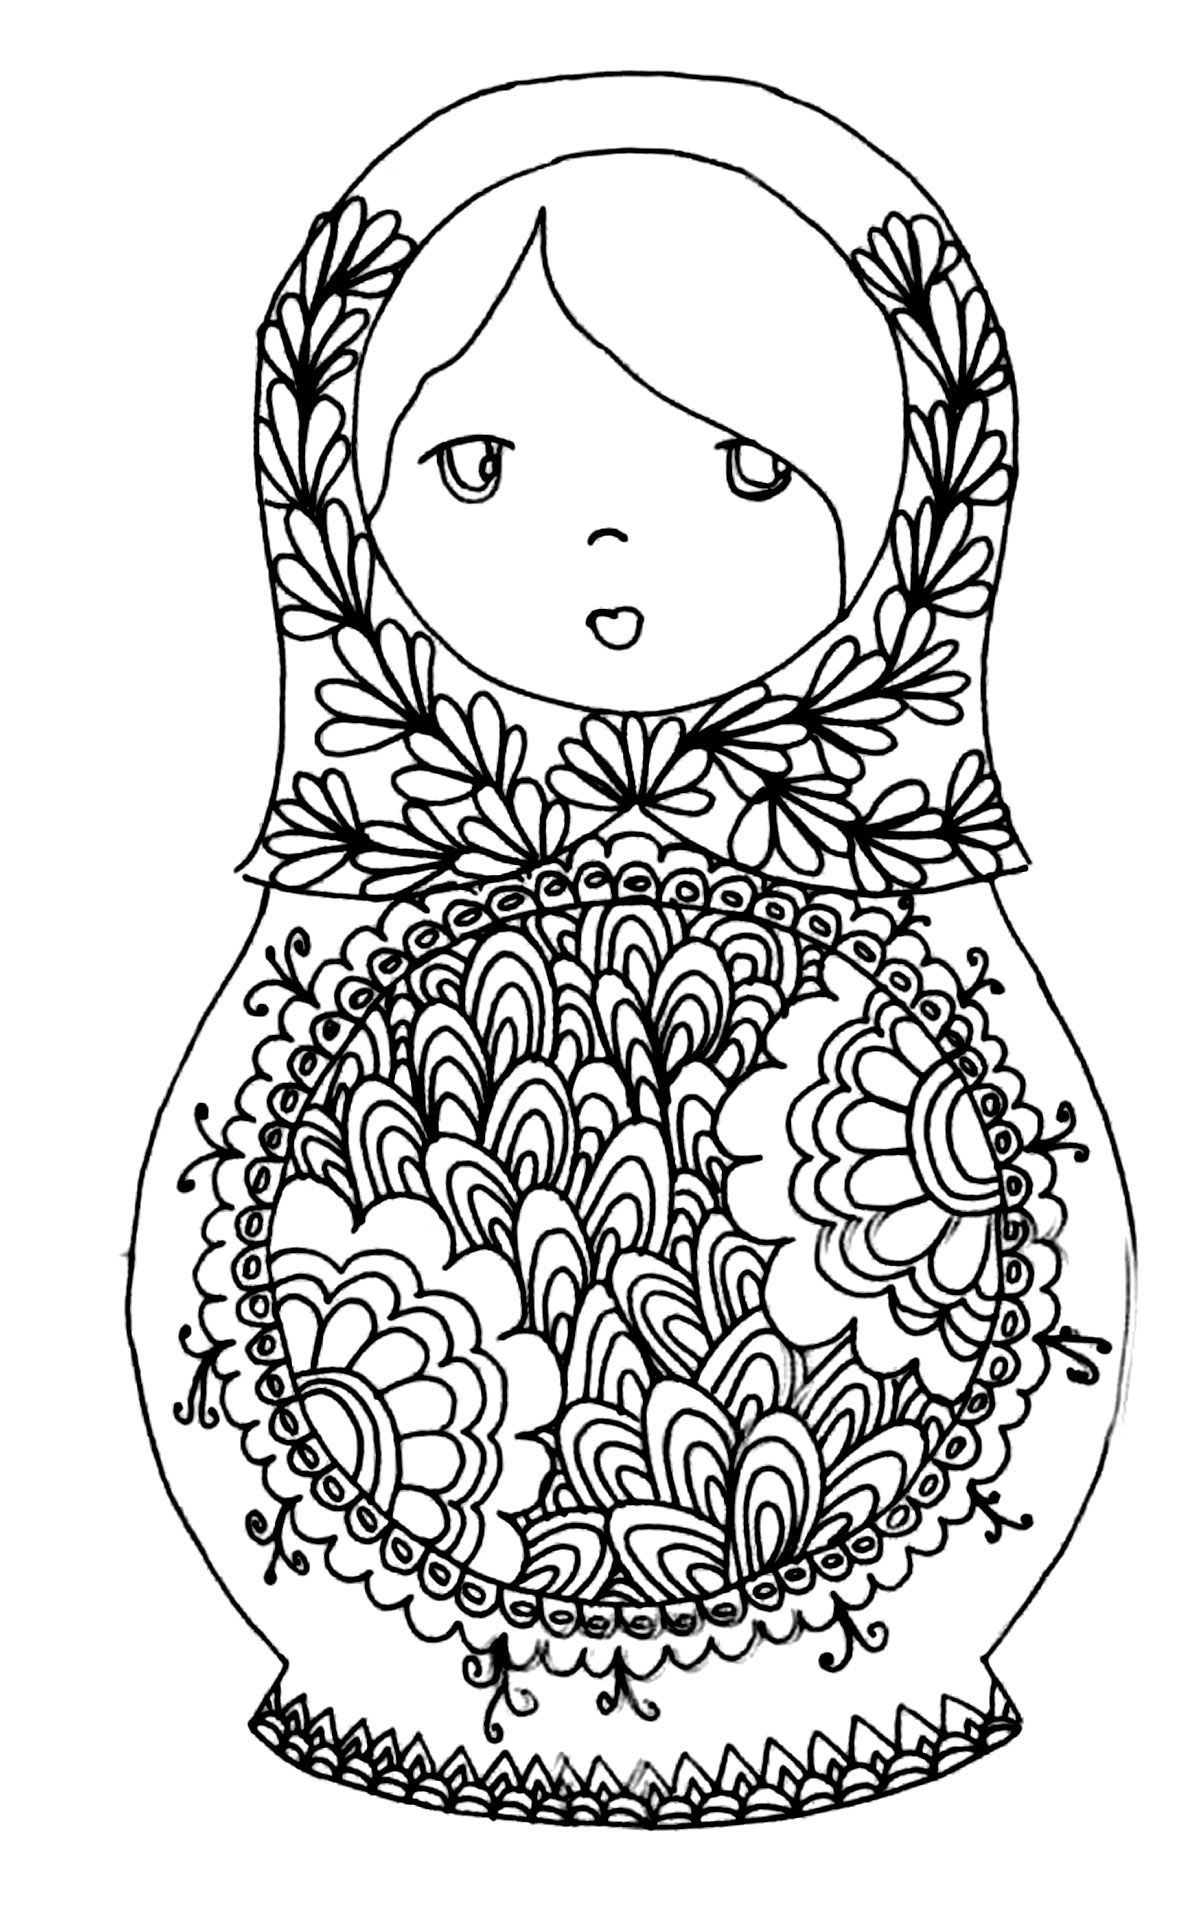 Russian dolls - Coloring Pages for adults